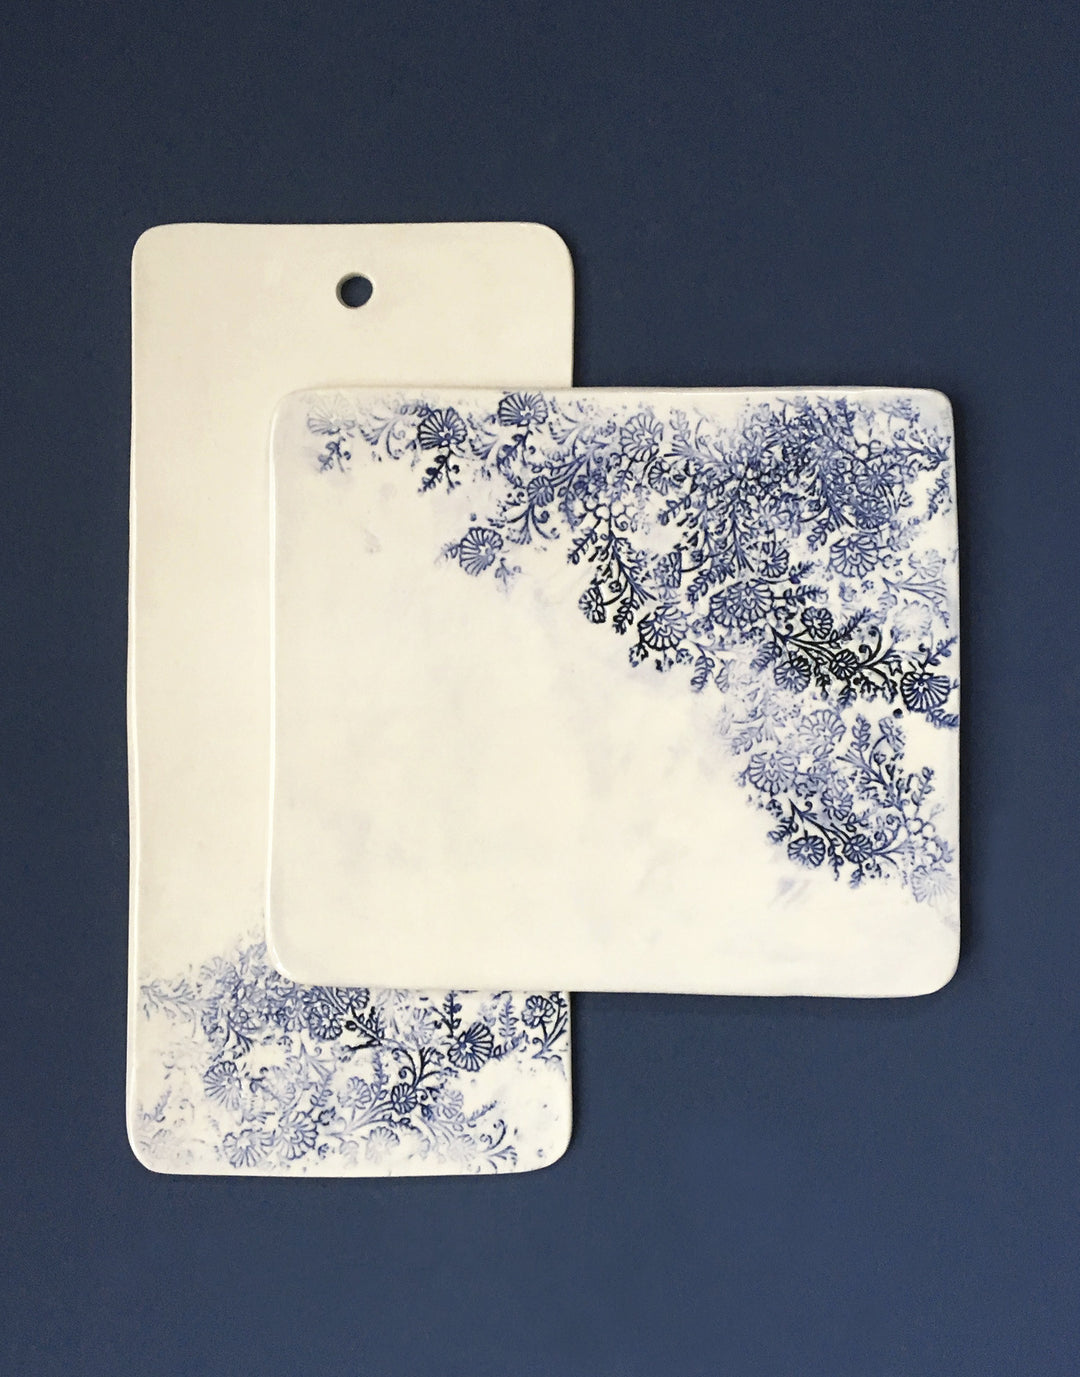 DBO HOME Handmade Porcelain Kashmir Floral Charcuterie and Cheese Boards